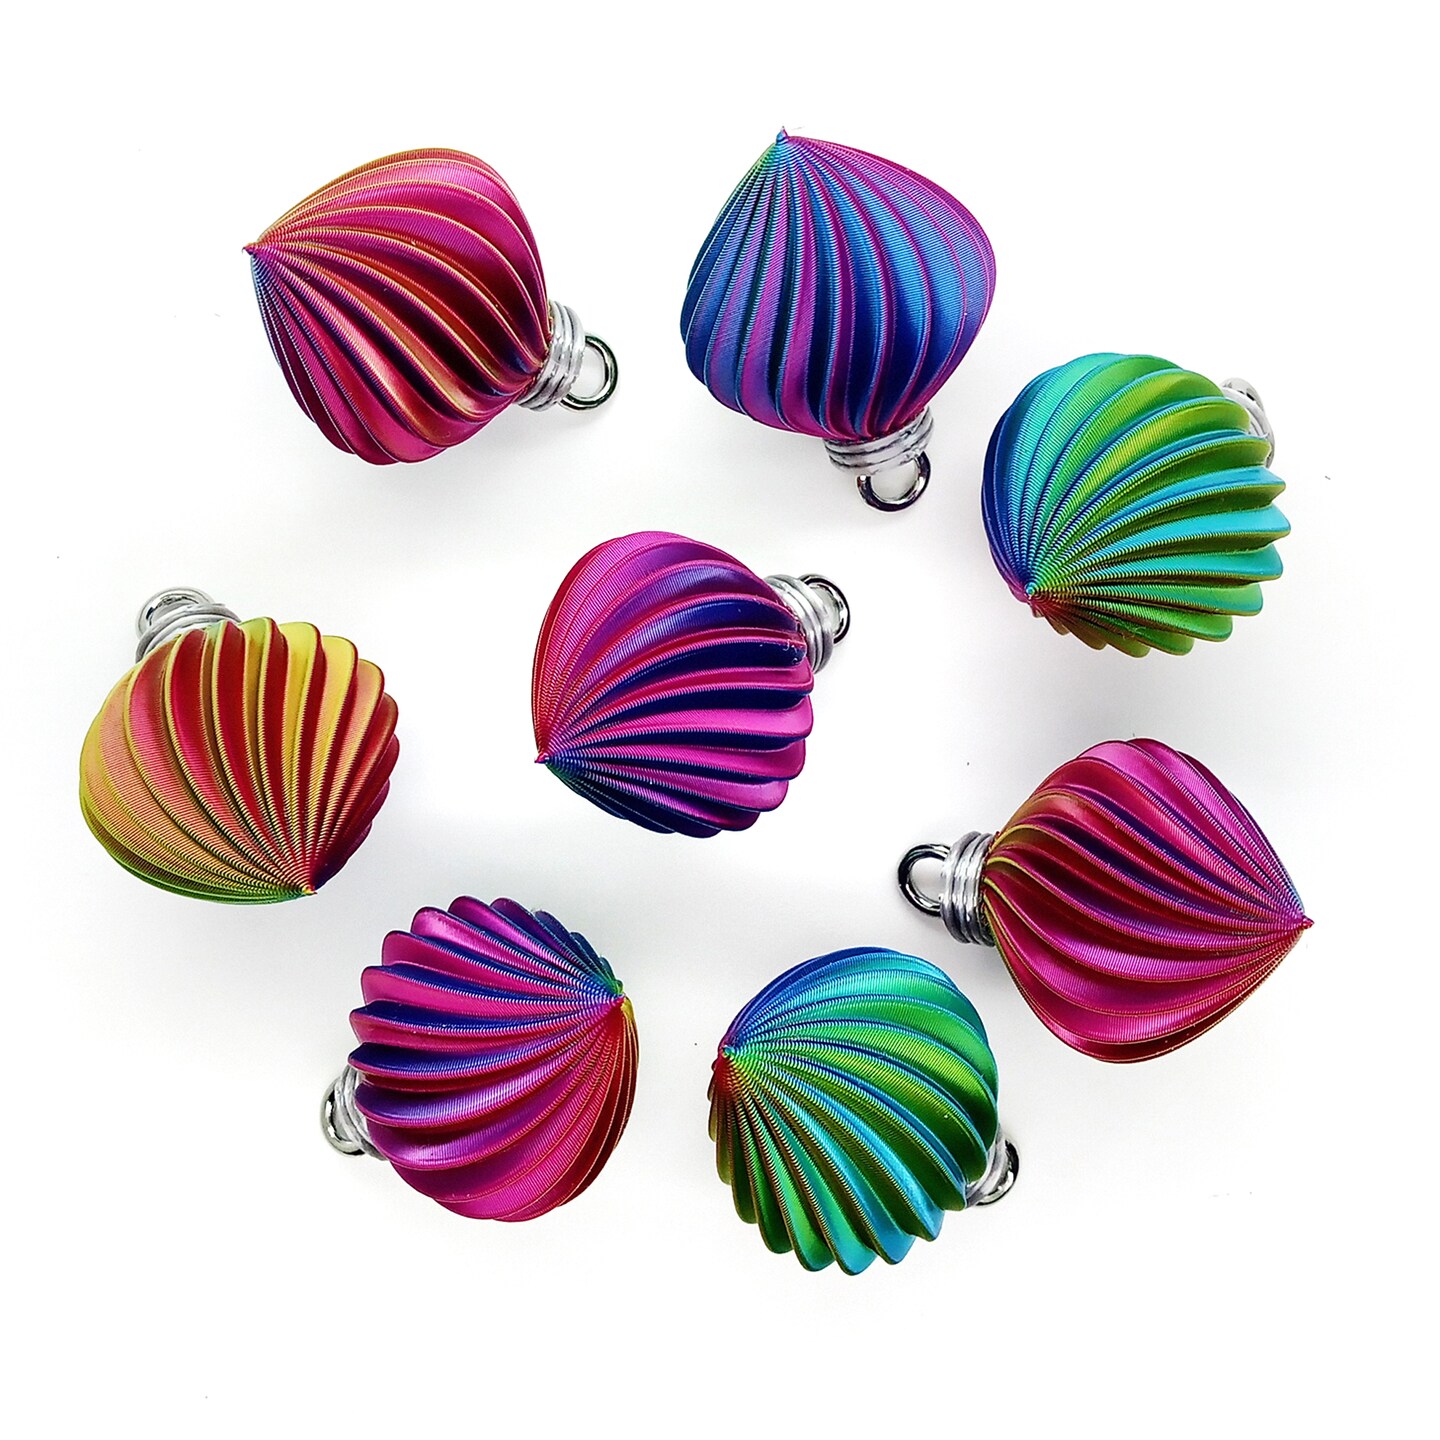 8 Miniature Ornaments, Pretty Rainbow Swirls for Small Christmas Trees, about 1 inch high, Adorabilities